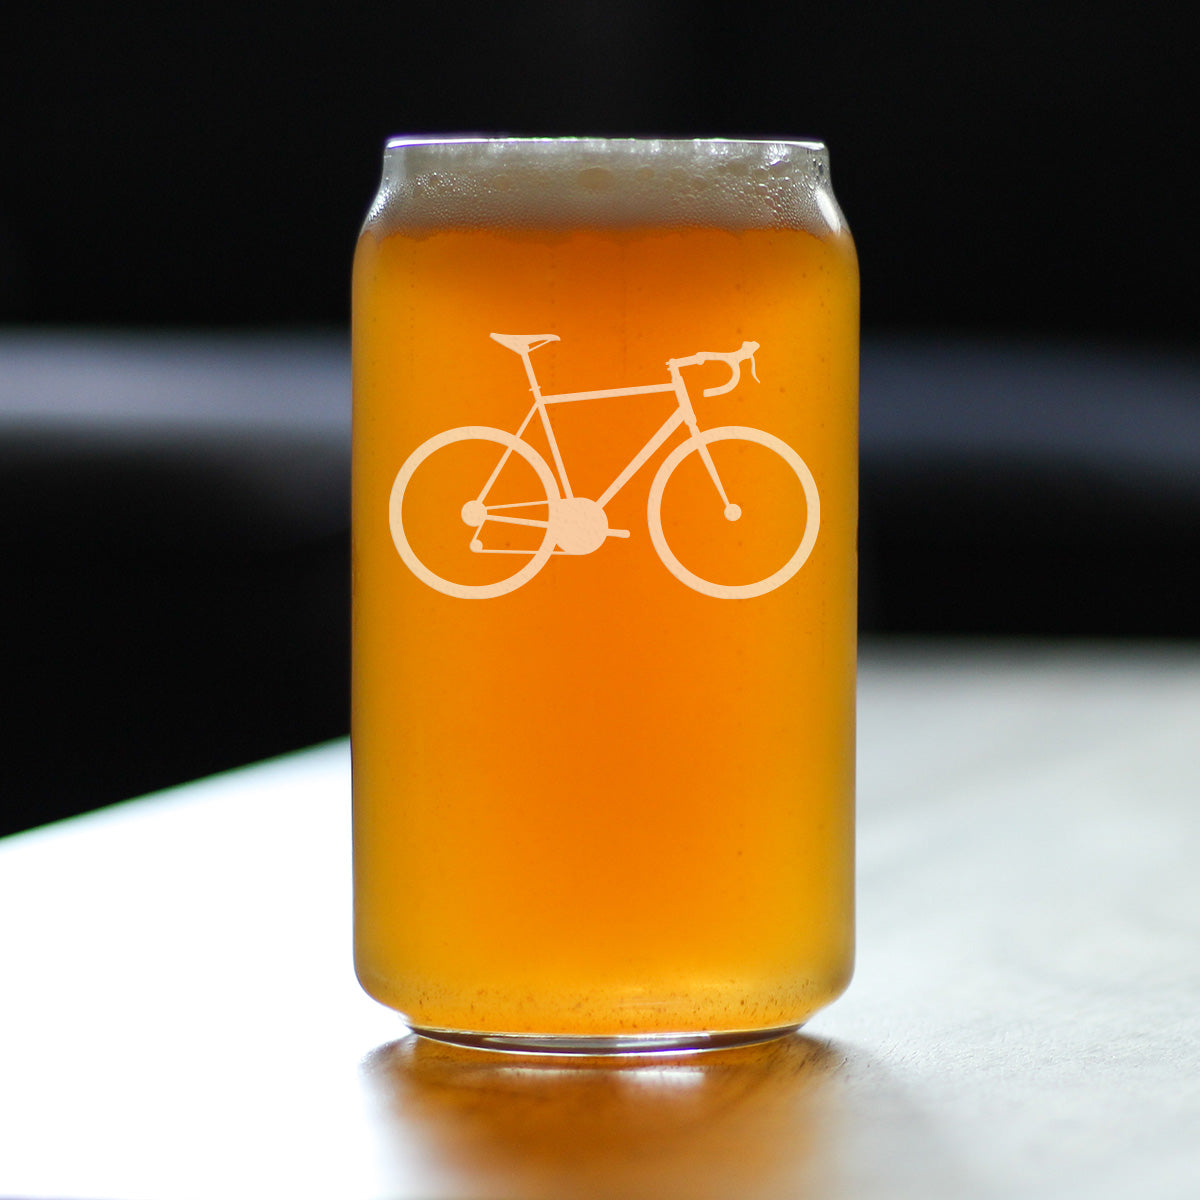 Bicycle - Beer Can Pint Glass - Unique Road Biking Themed Decor and Gifts for Cyclists - 16 oz Glasses